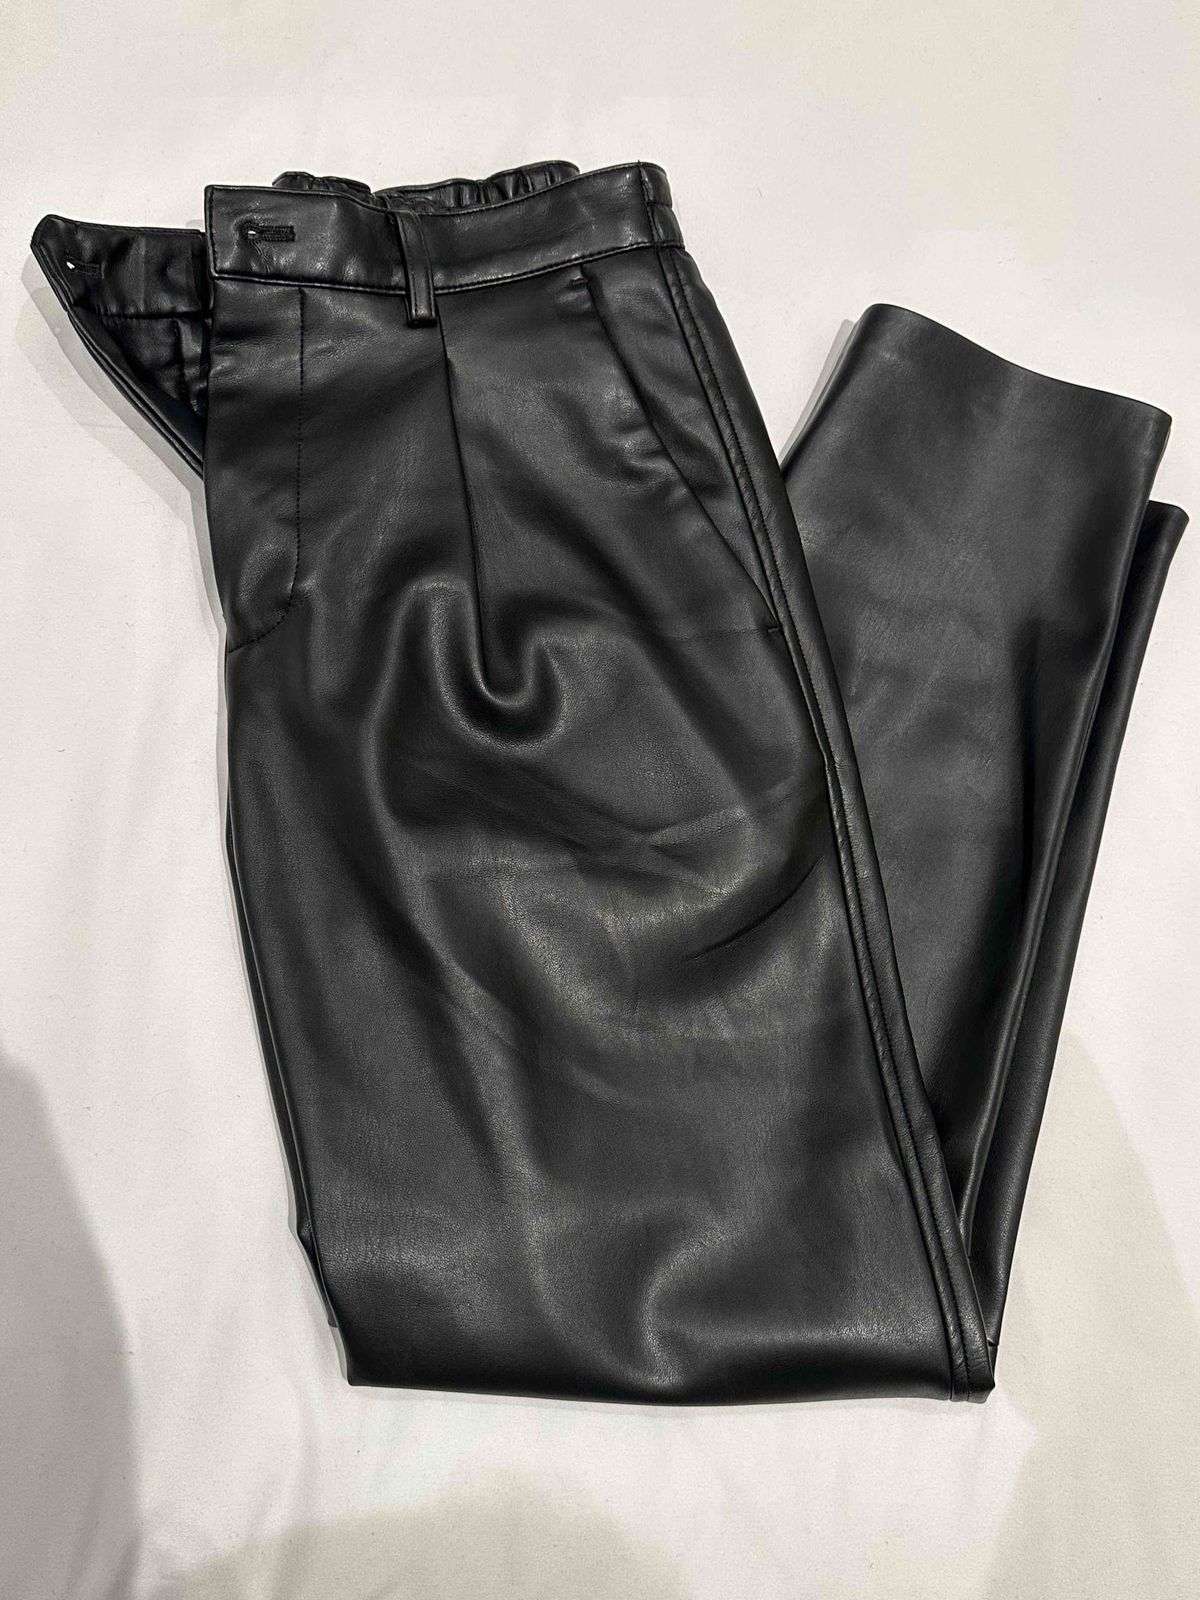 Jeans & Trousers | Zara Nude Leather Pants Combo Silver 925 Chain | Freeup